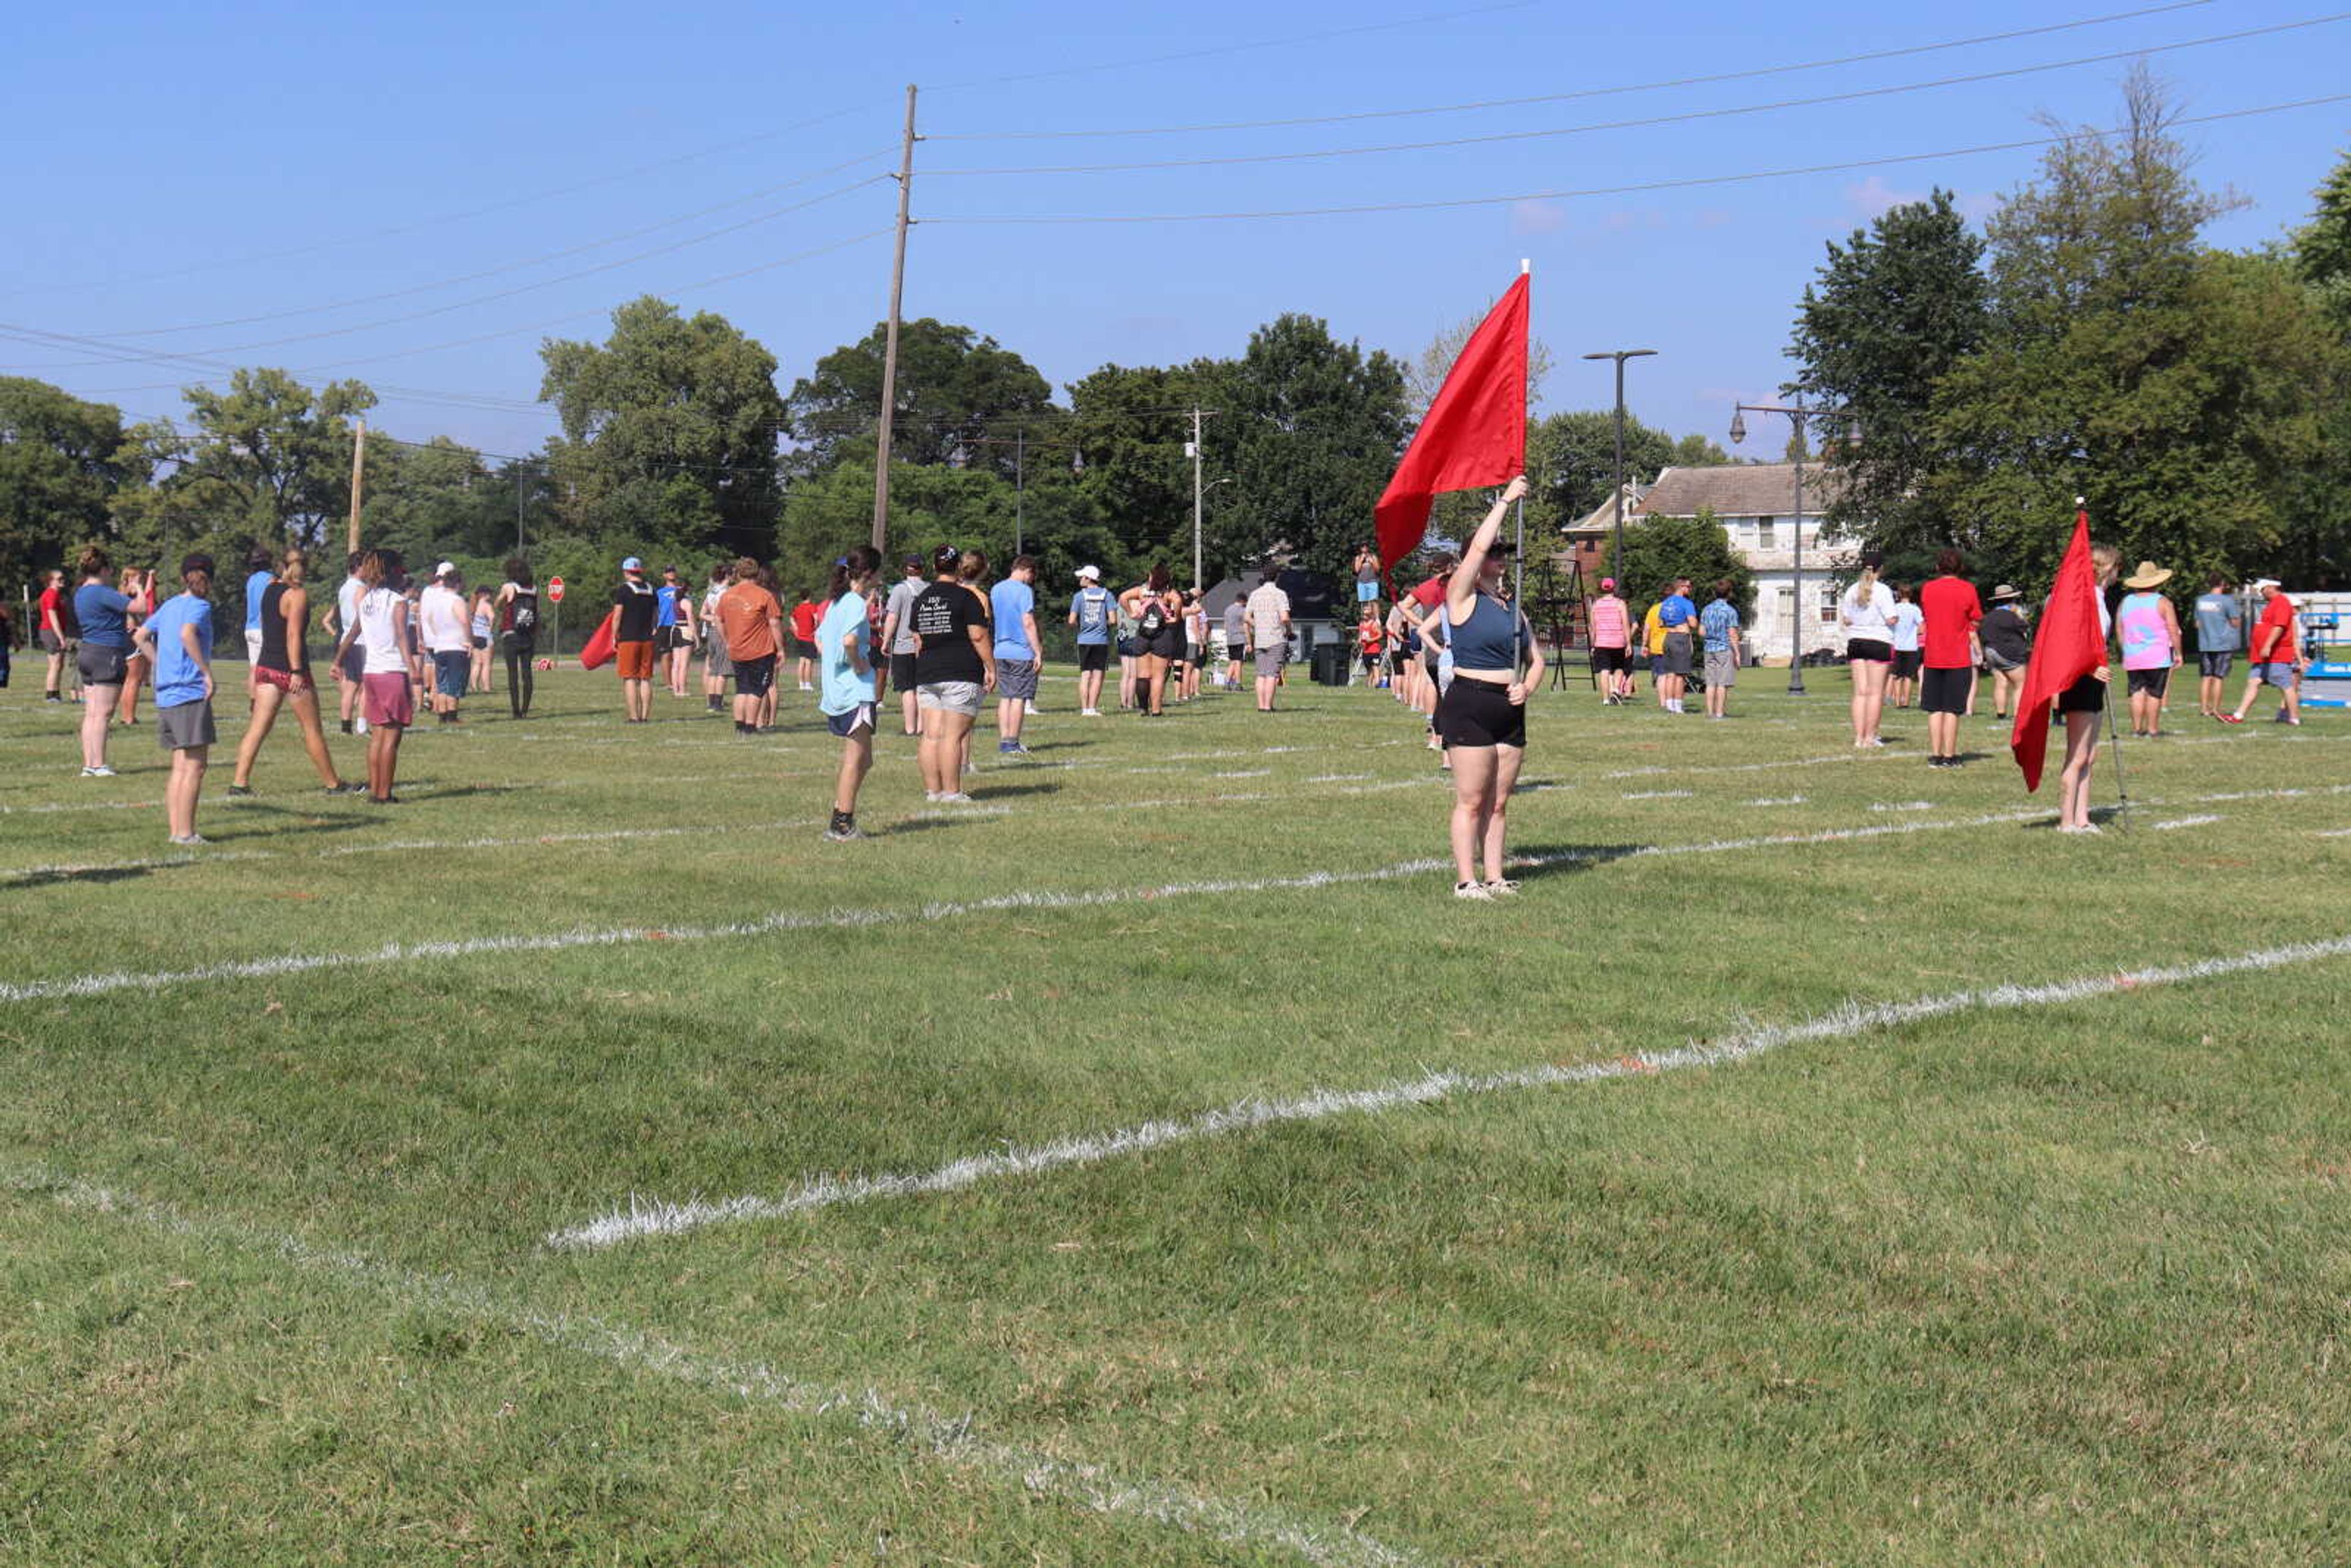 New band director leads largest SEMO marching band